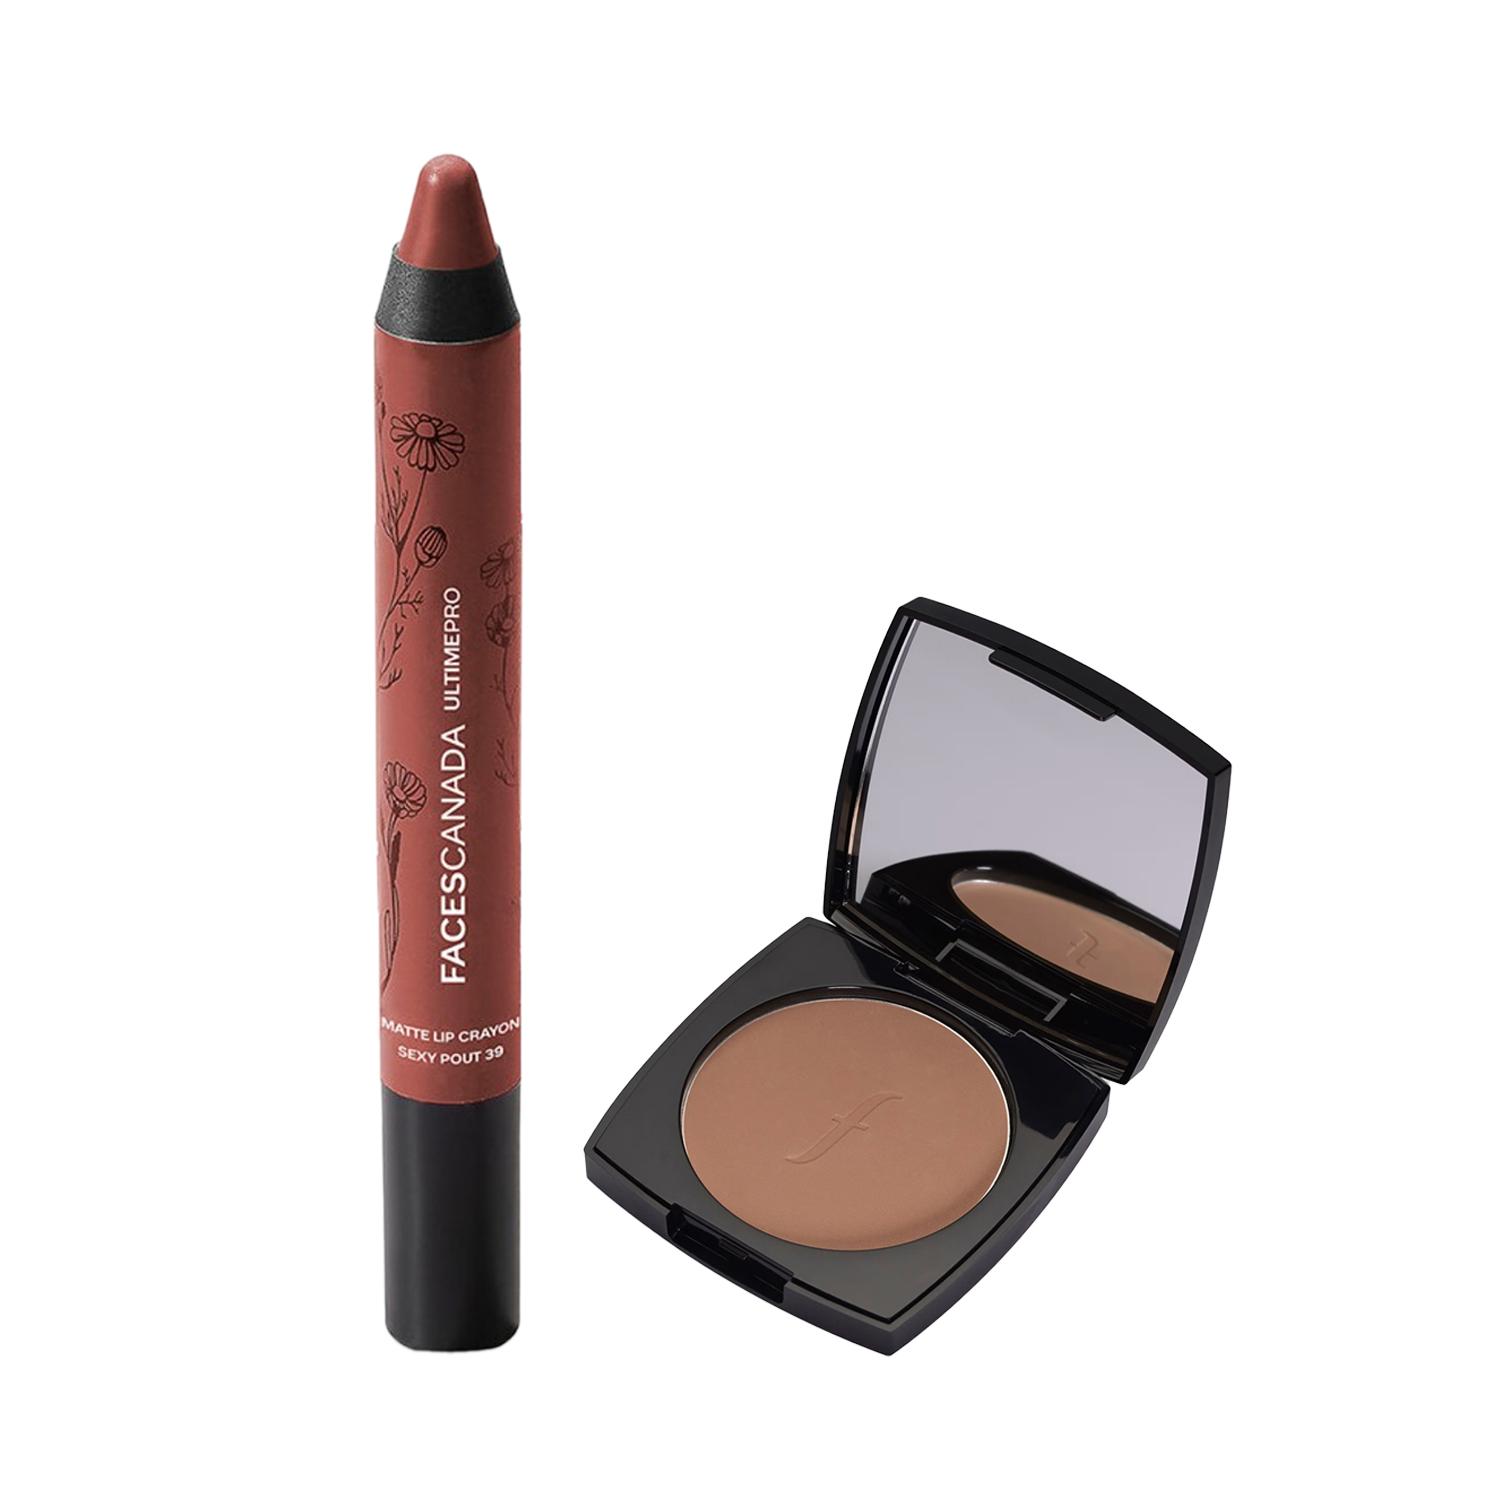 Faces Canada | Faces Canada Sun Defense CC Powder - Sand (8g) and Matte Lip Crayon - Wrapped Up (2.8g) Combo